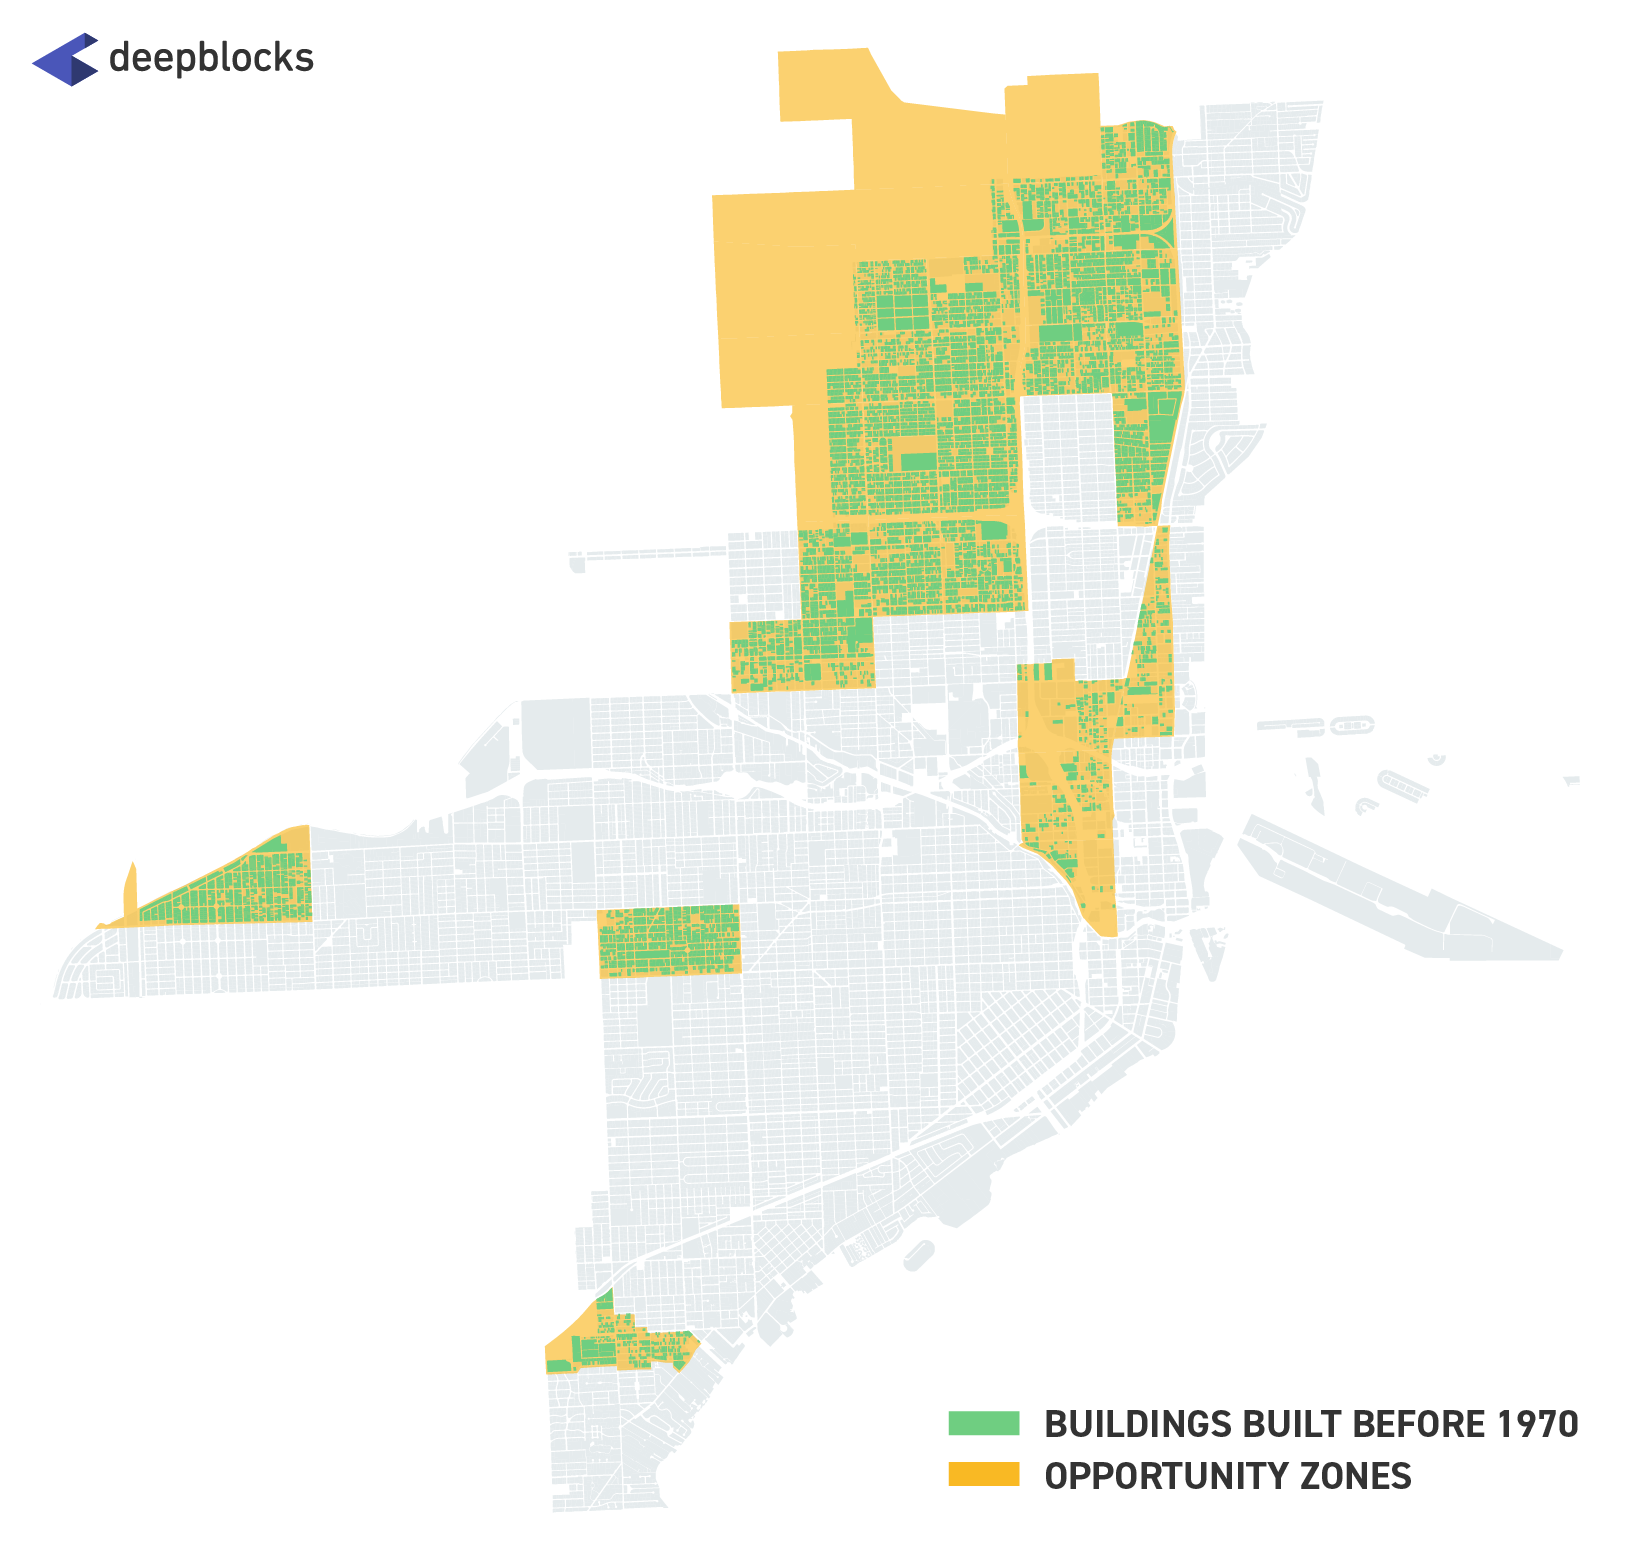 Opportunity Zone parcels with Old Buildings in City of Miami.